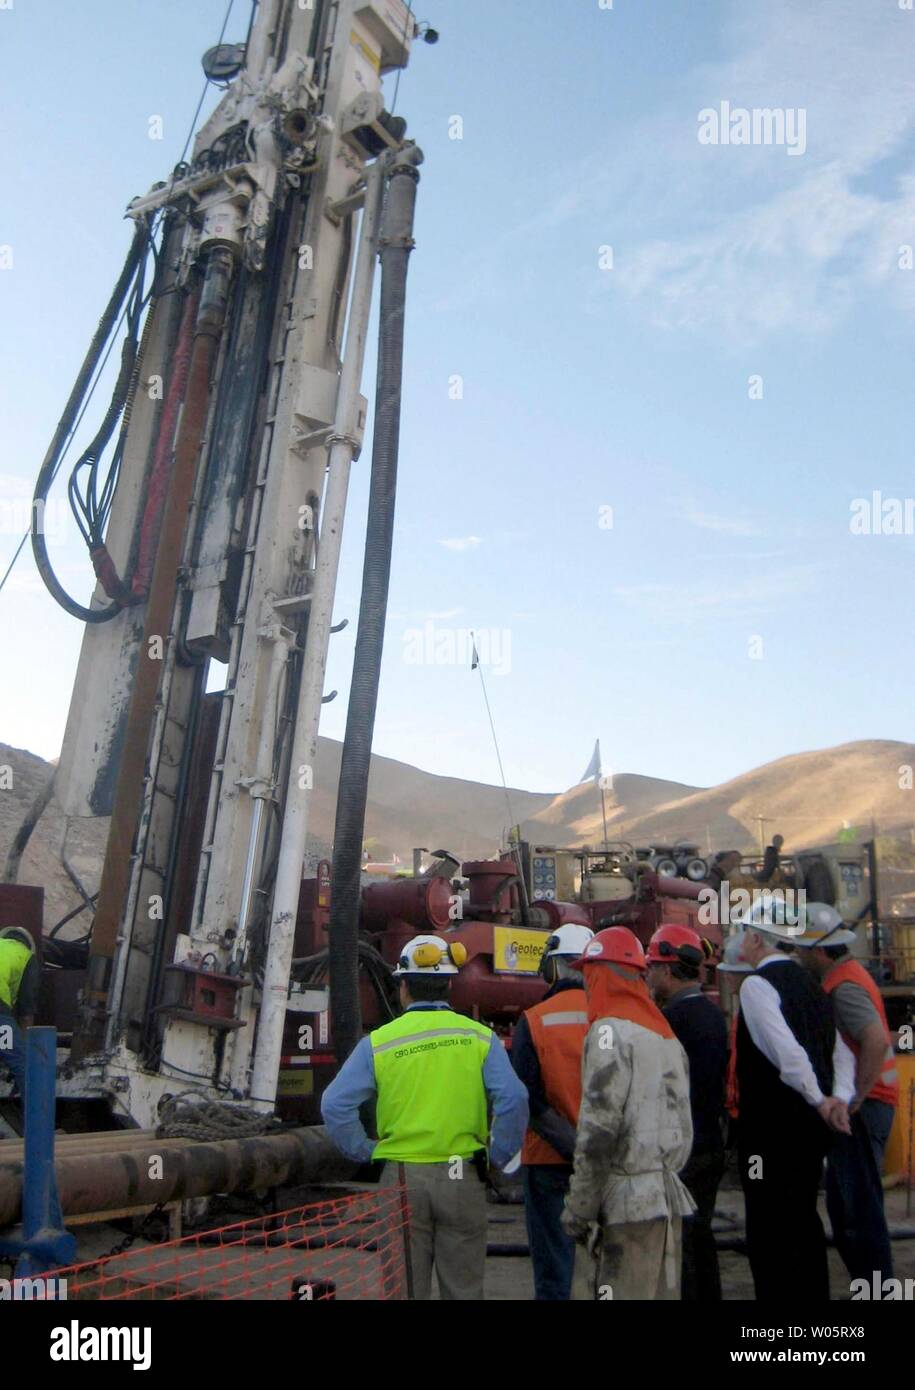 Mining engineers look at the drilling machine as it bores through the earth to within 500 feet of the trapped miners in San Jose Mine, Chile on October 4, 2010.  Chilean President Sebastian Pinera said the rescue efforts were expected to pull the 33 miners to safety by the end of the month.  The miners were found alive on August 22nd after a mine collapse.    UPI/Sebastian Padilla Stock Photo